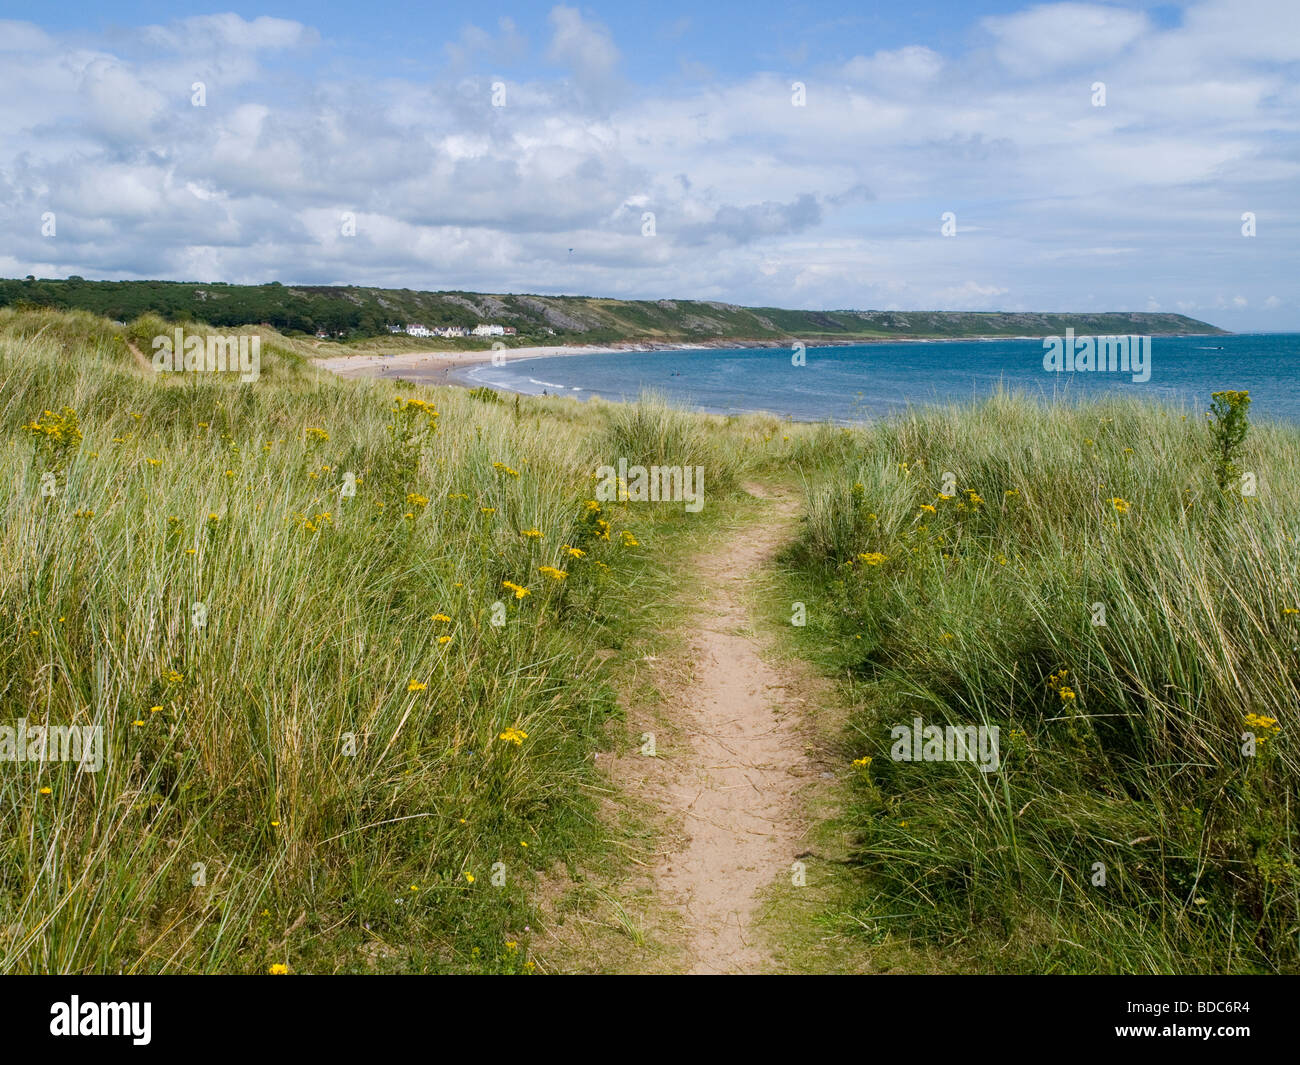 A view through the grass by the beach at Port Eynon, Gower Peninsula Swansea Wales UK Stock Photo